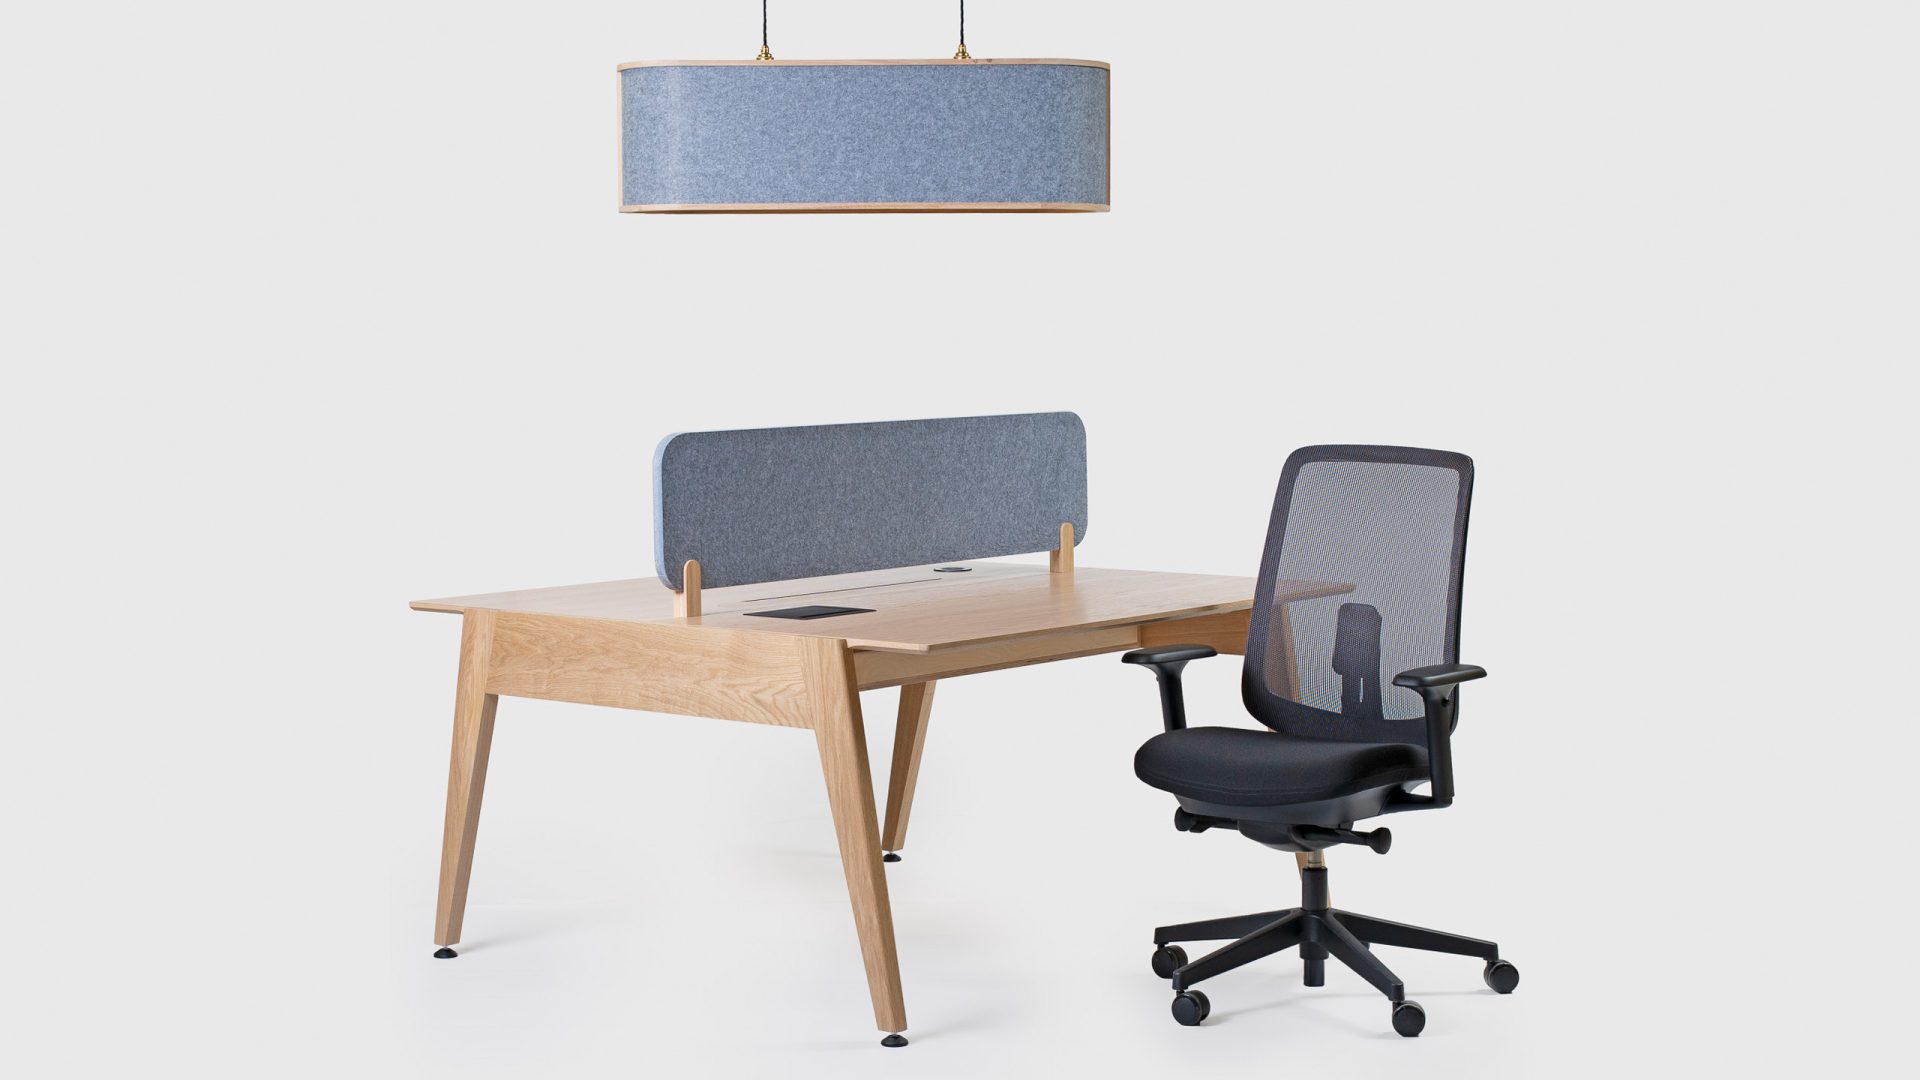 The Theodore Edge Office Desk – shown here with optional top divider and the Sonus Acoustic Pendant Light. All by Liqui Contracts.